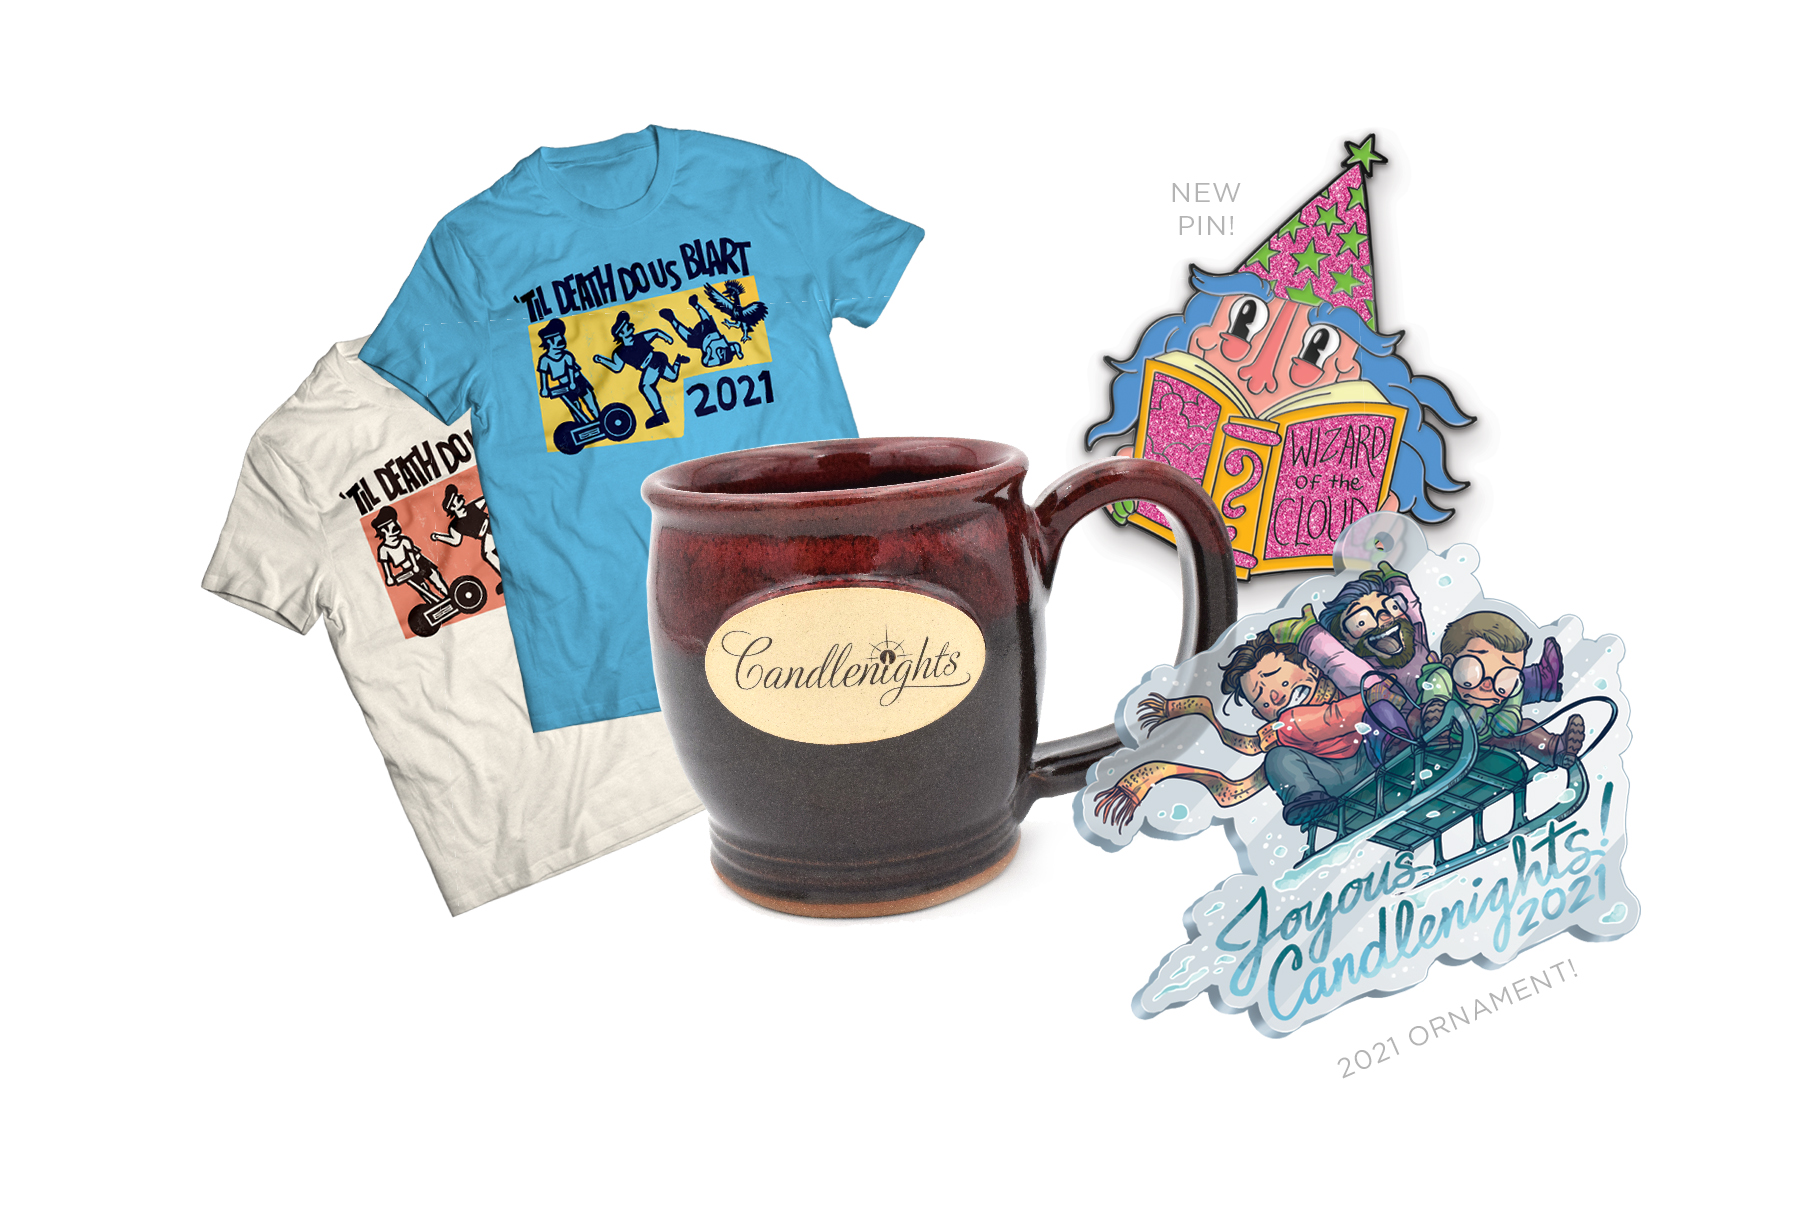 Image of the November merch items. On the left are two shirts that say “‘Til Death Do Us Blart 2021” with a graphic of a man on a segway, running, and fighting a rooster. One shirt is white with a red graphic and the other is blue with a yellow graphic. In the center is a stoneware mug with an oval emblem that says Candlenights on the front. To the right is an enamel pin of a wizard holding a book that says “Wizard of the Cloud.” Below that is an acrylic ornament of the brothers sledding.